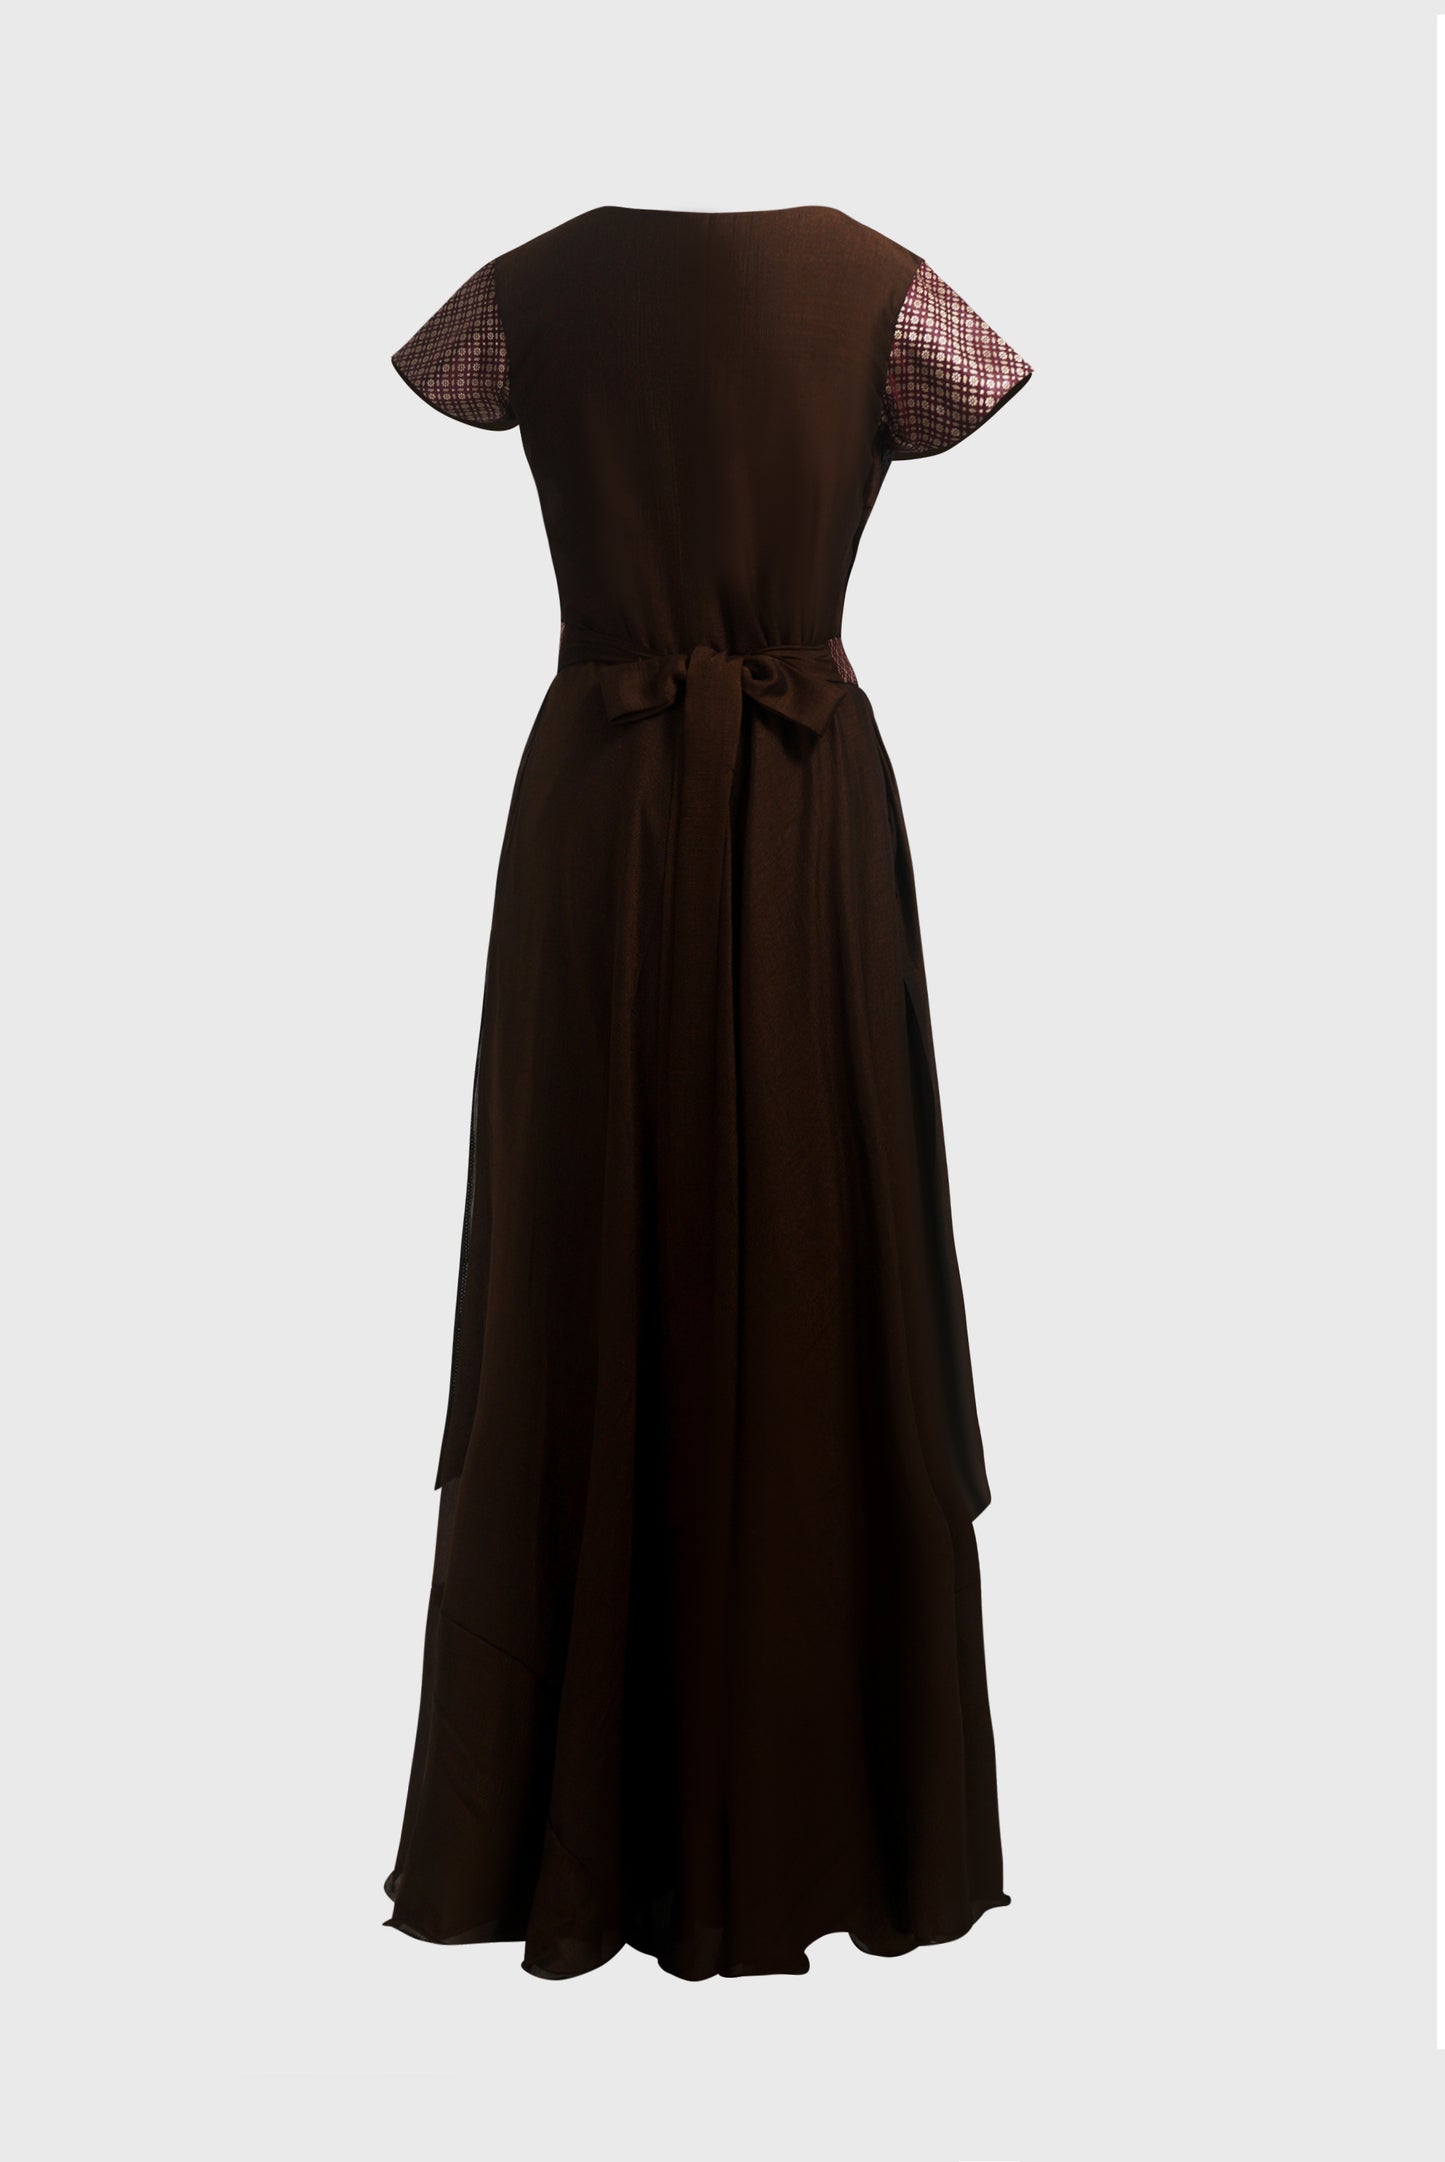 ZIA242 Brown Brocade Layered Gown